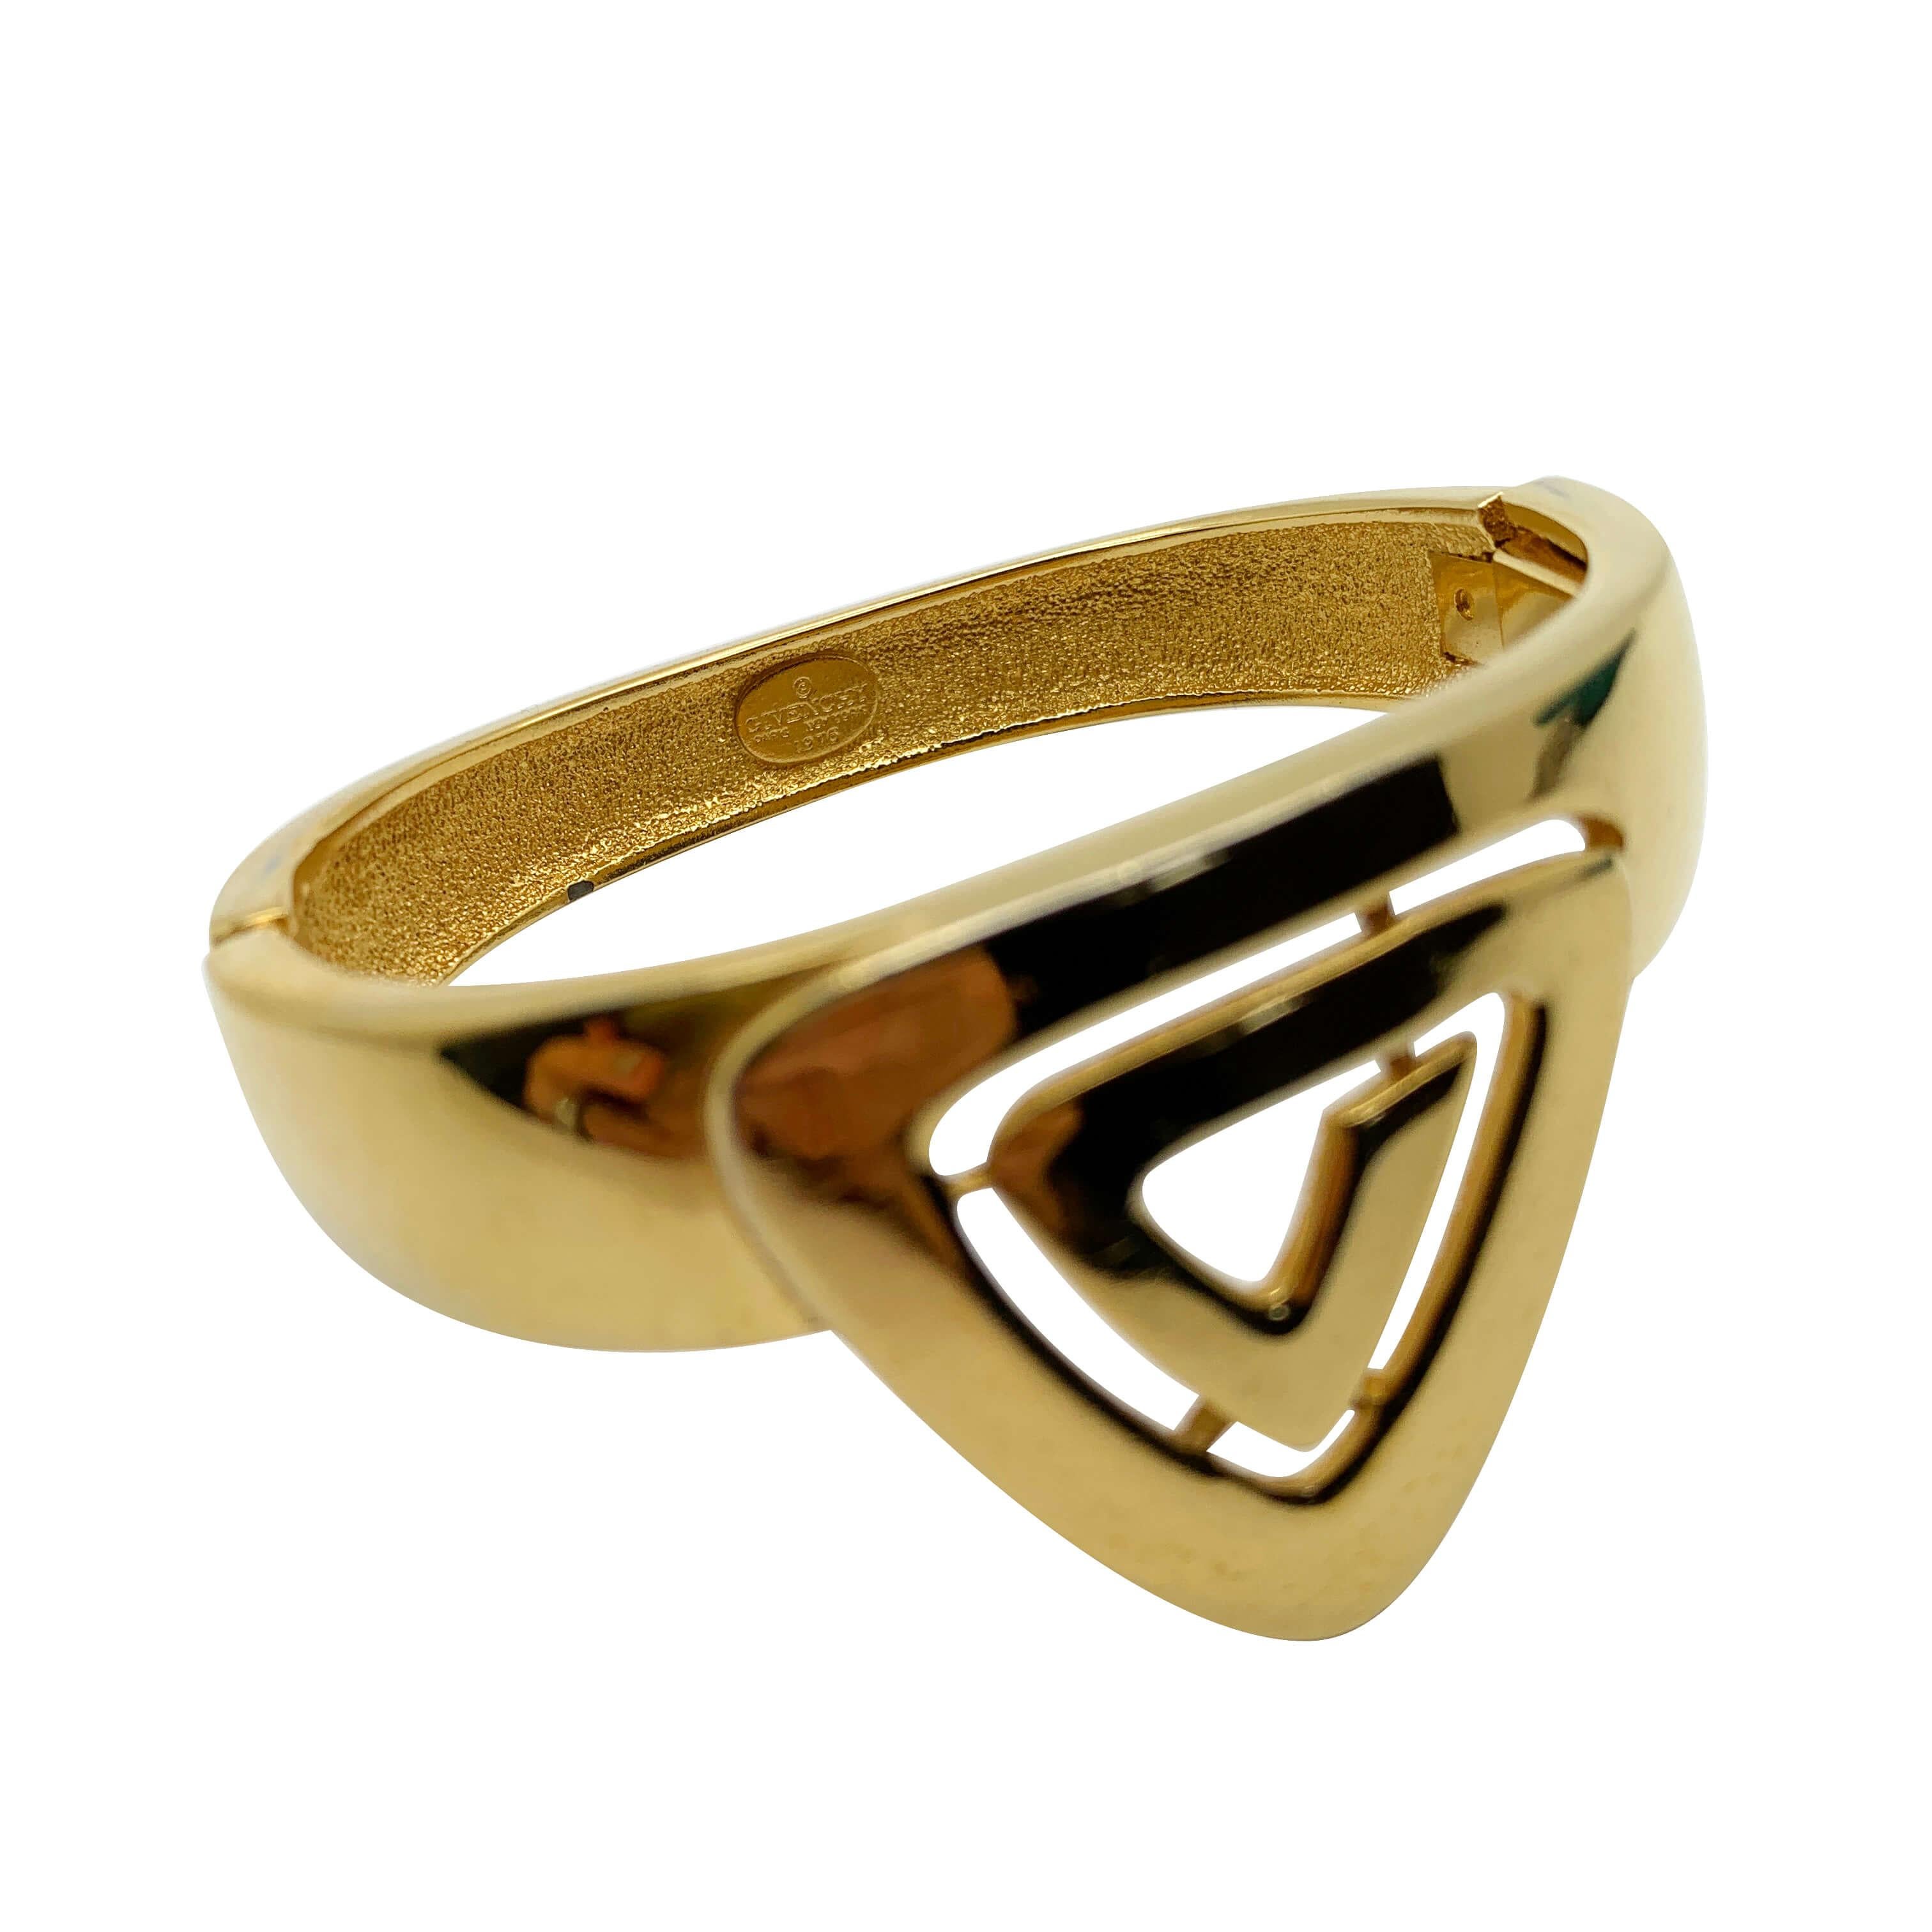 A wonderfully modernist Vintage 1976 Givenchy Cuff. Oozing 70s chic this beauty is already and will undoubtedly continue to be a style staple. One to add intrigue and flair to your look day or play.
One of the late great 20th century couturiers,